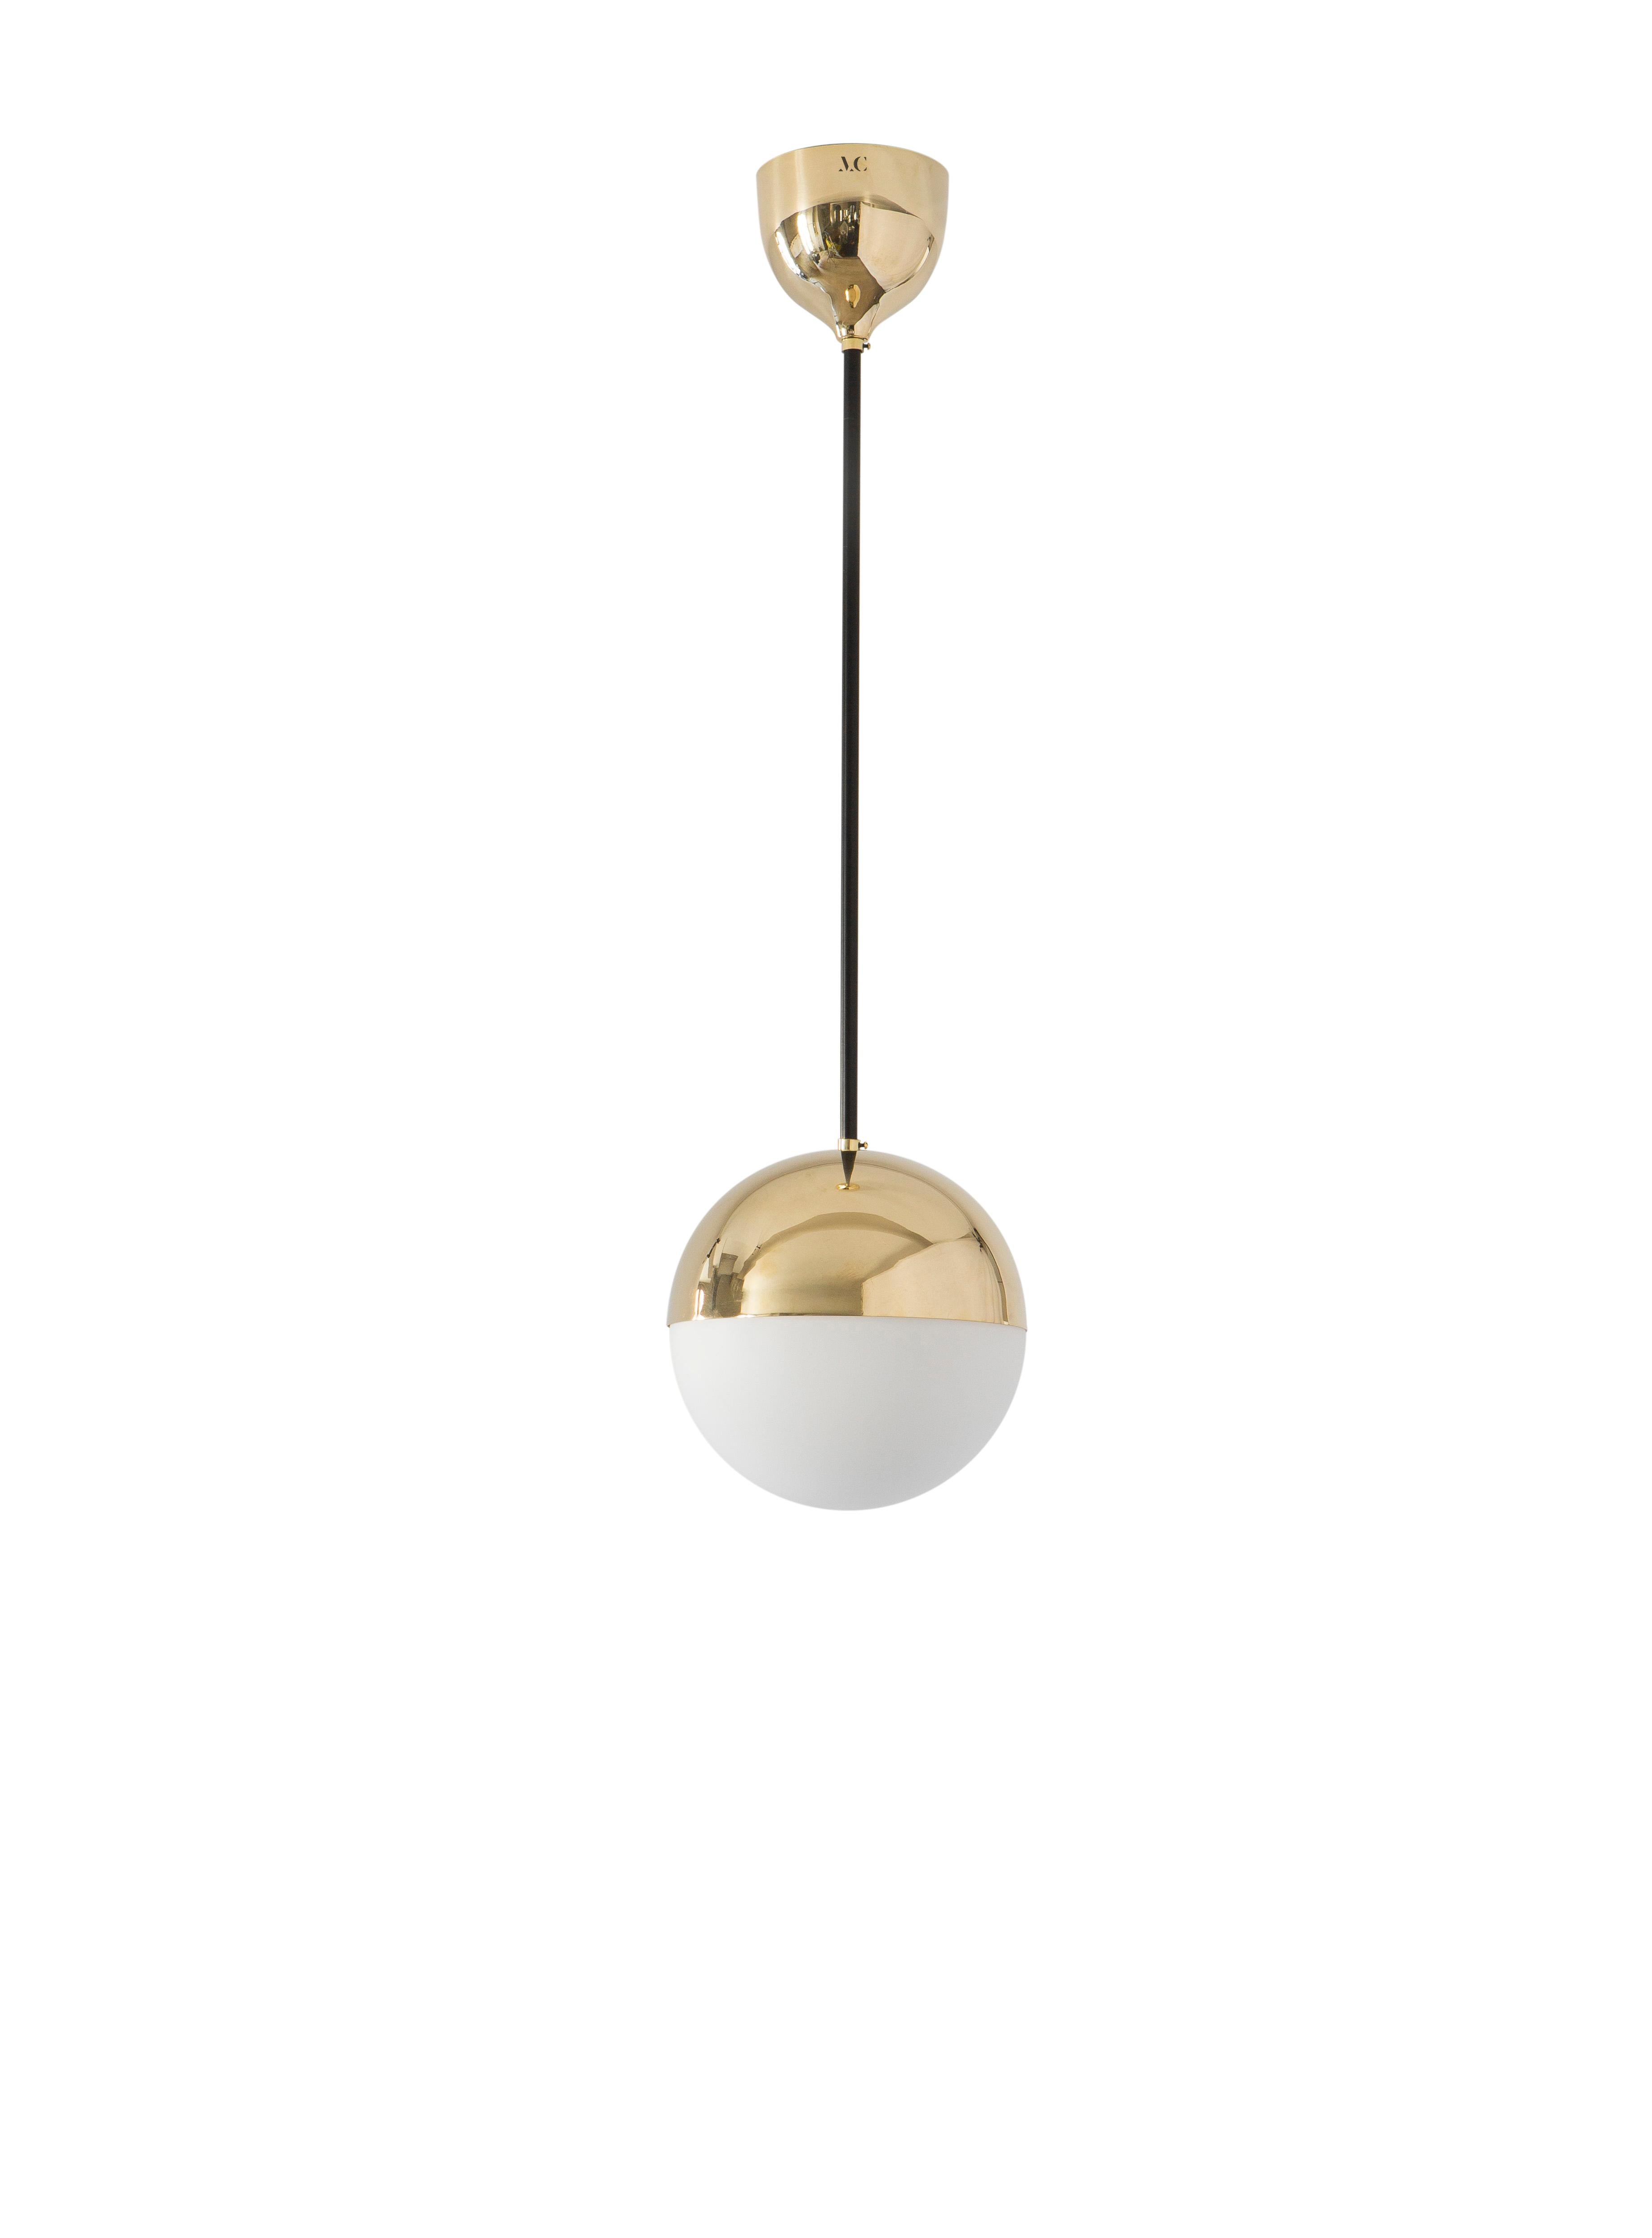 Pendant 01 black tube 110 by Magic Circus Editions
Dimensions: D 25 x W 25 x H 110 cm, also available in H 90, 130, 150, 175, 190 cm
Materials: Brass, mouth blown glass

All our lamps can be wired according to each country. If sold to the USA it